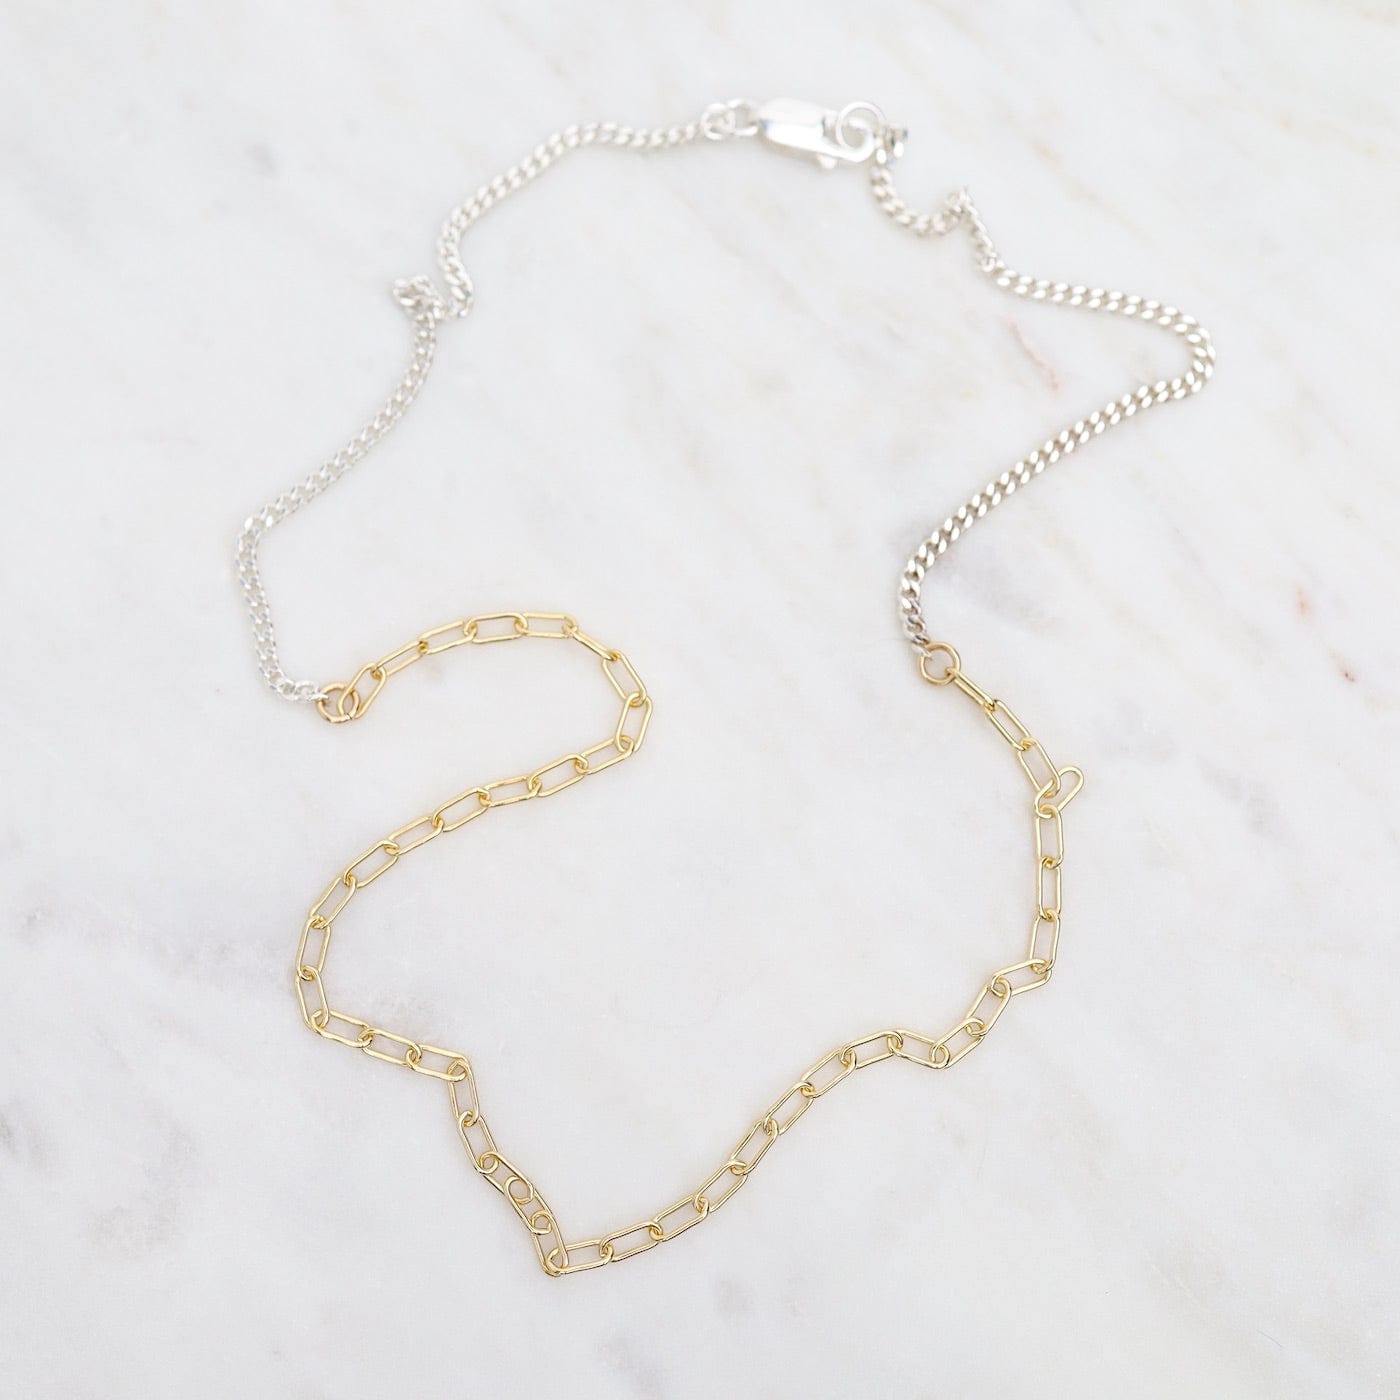 NKL Mixed Chain Necklace with Silver Curb & Gold Drawn Cable Chain